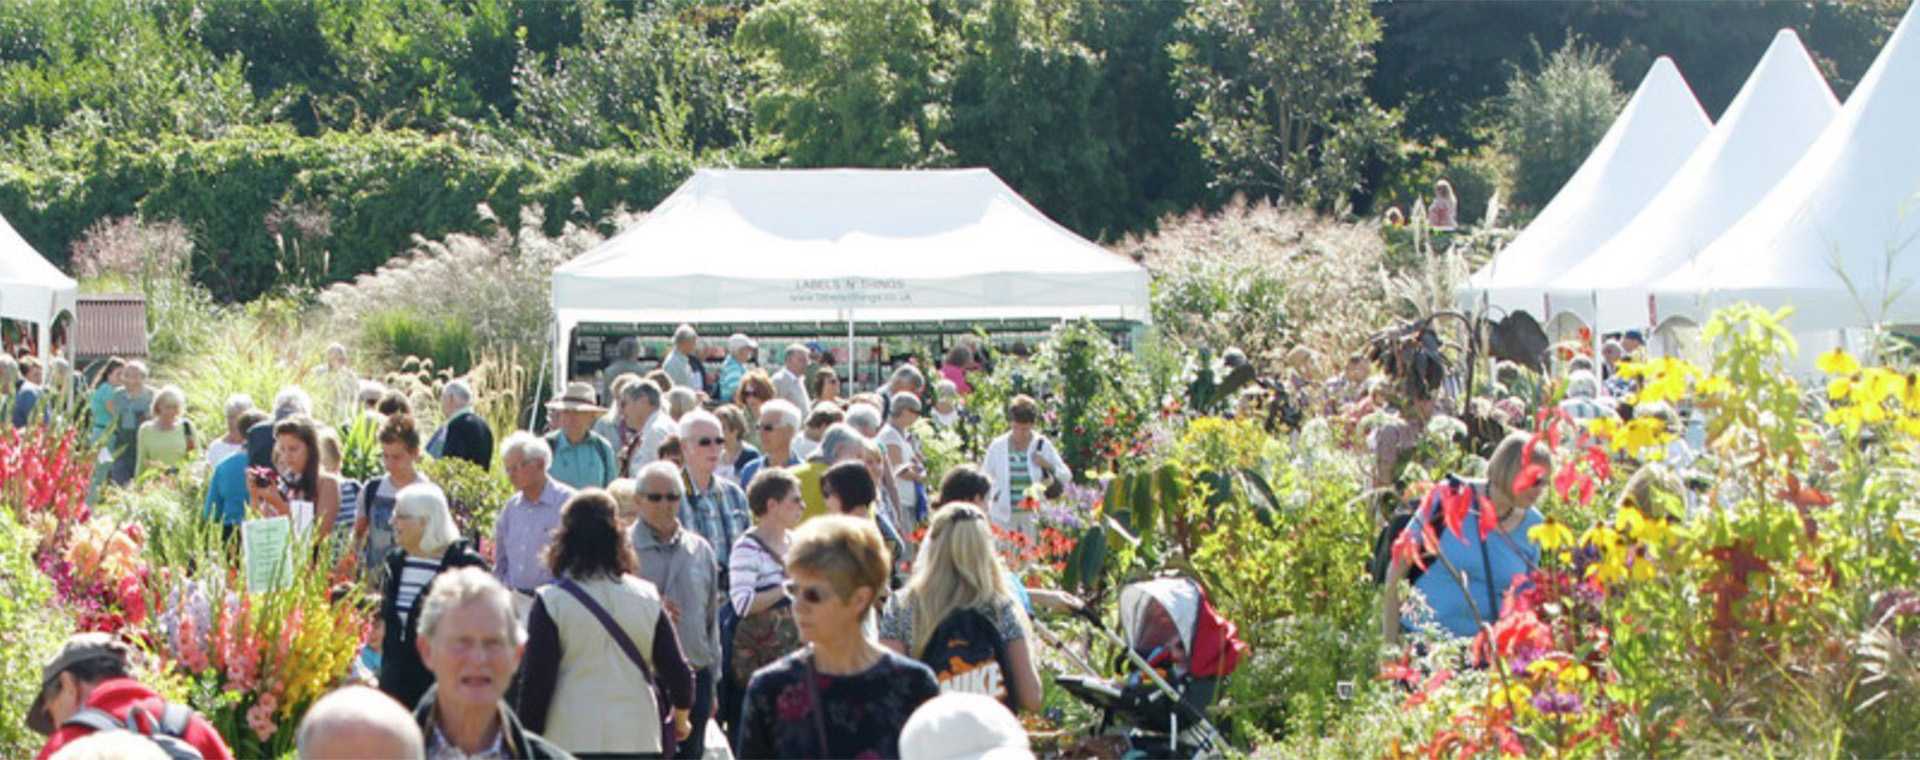 Crowds at a flower show.